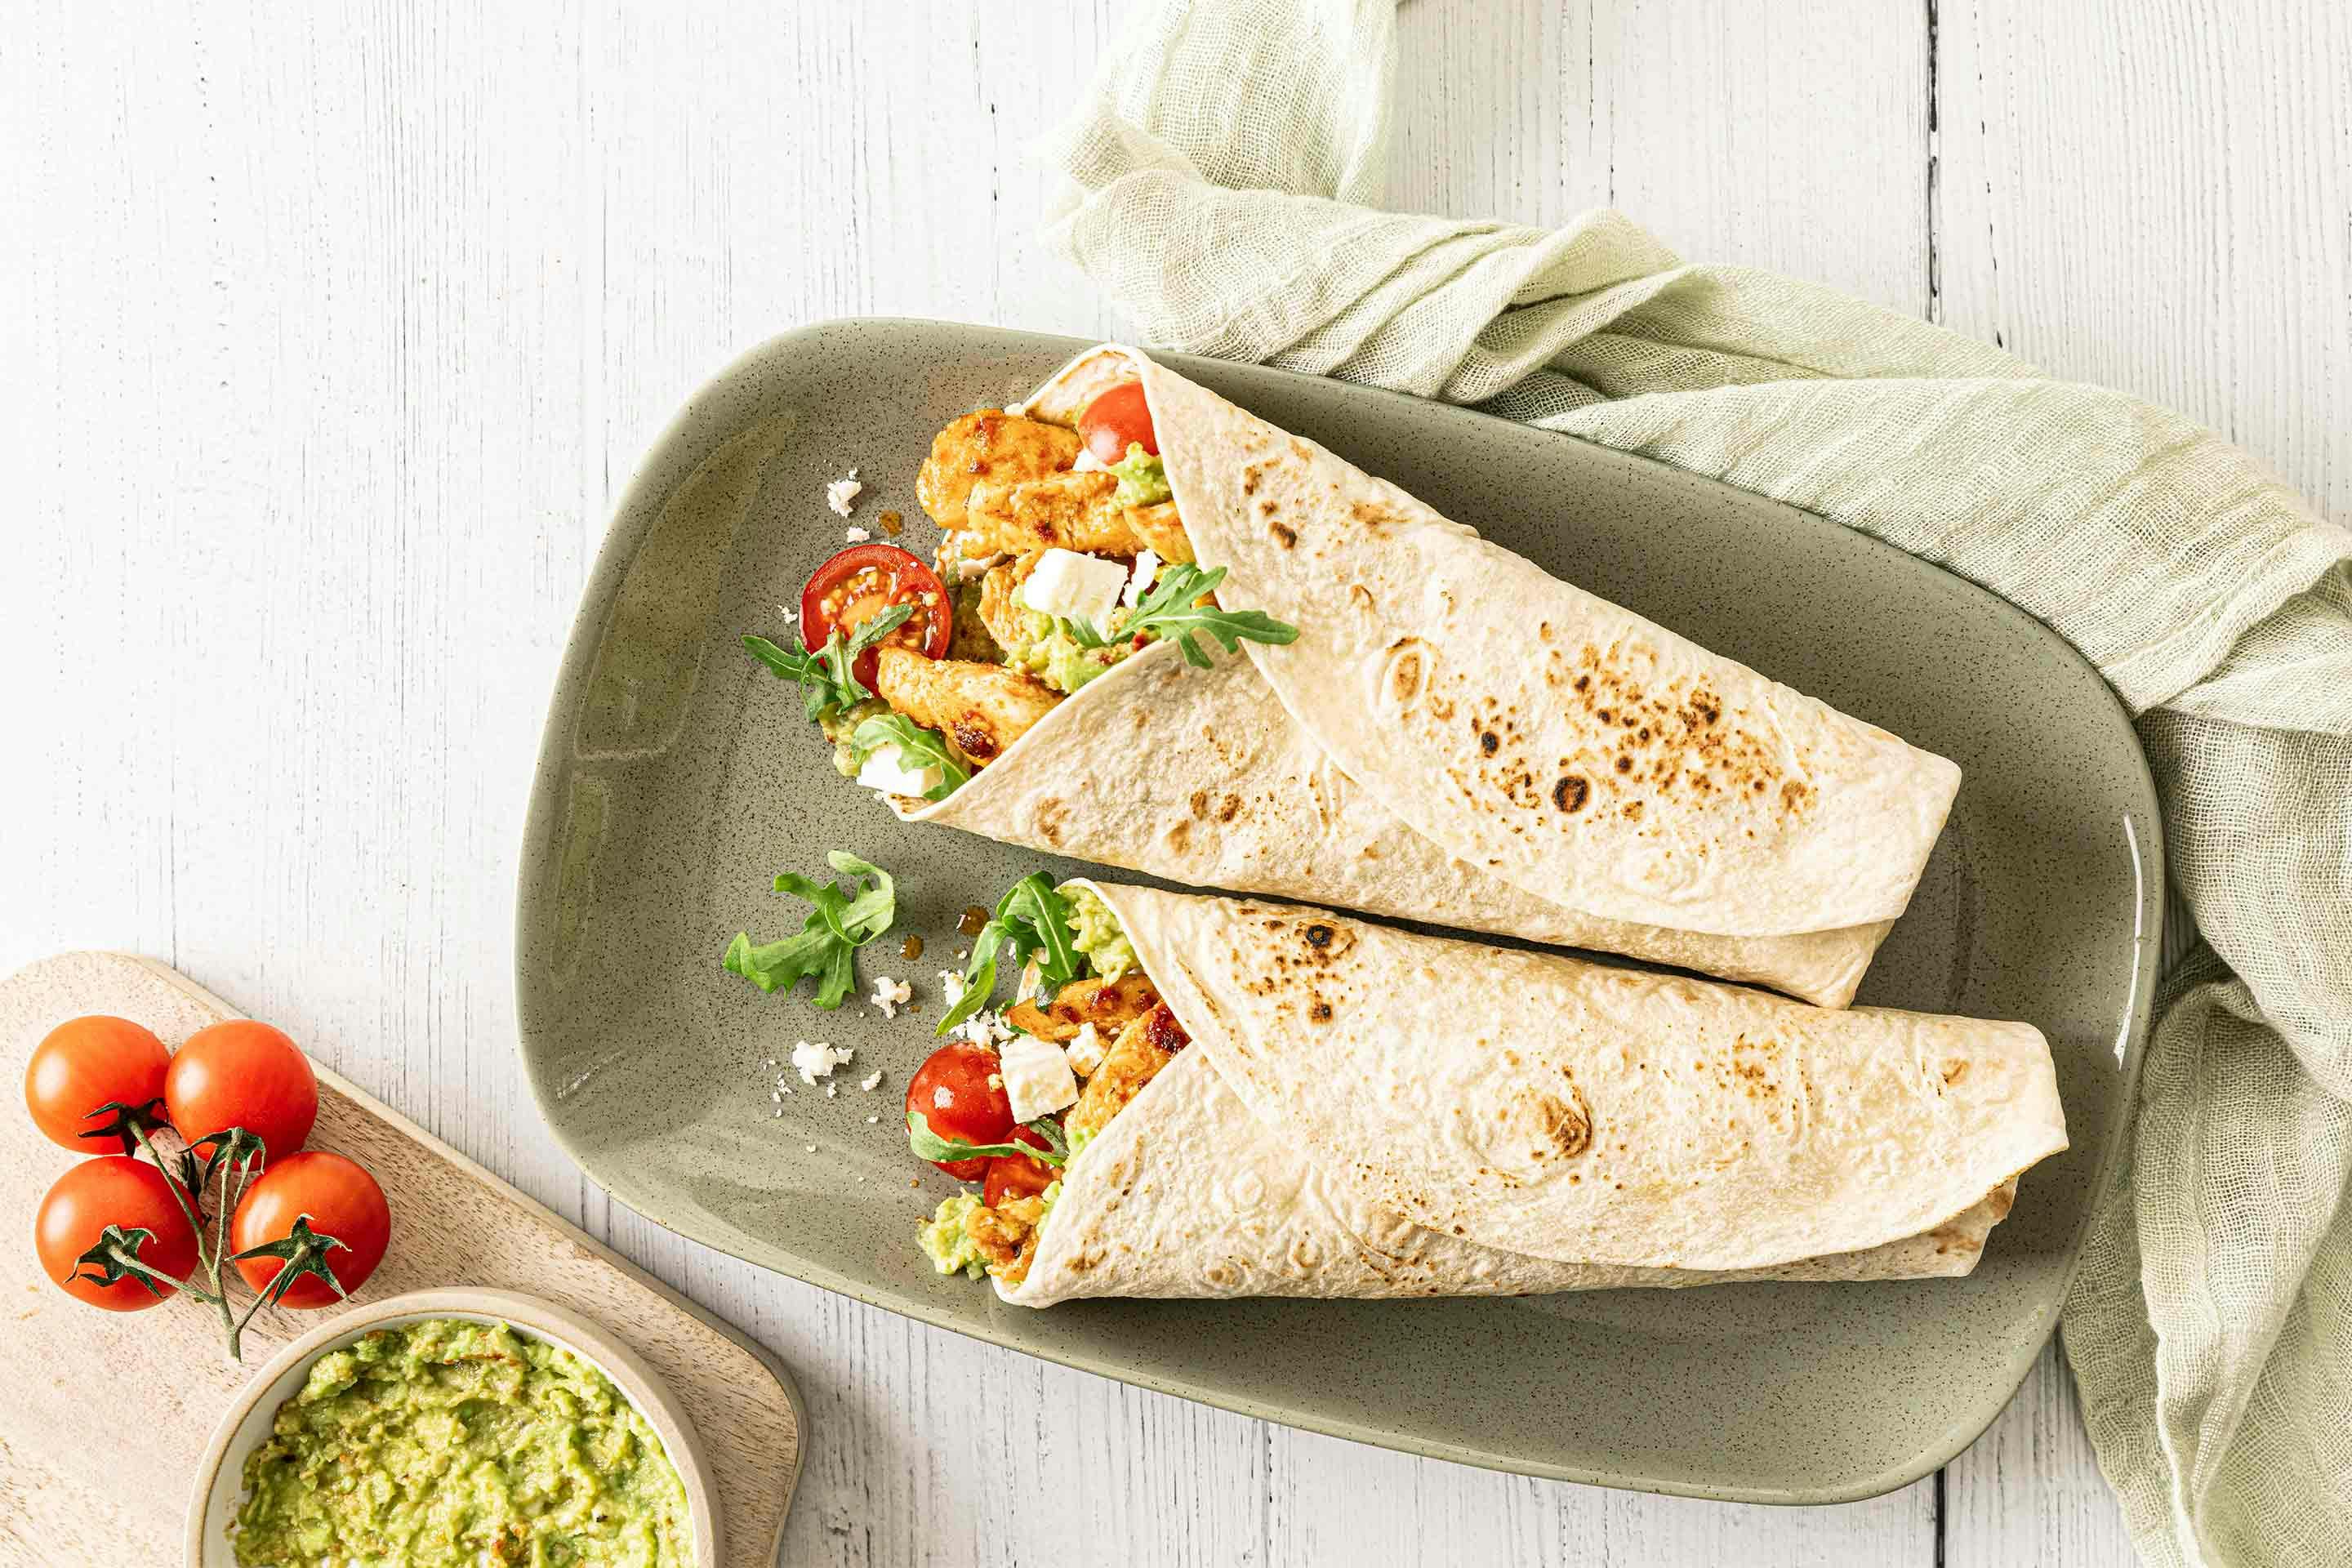 Simple to make and incredibly delicious – Quick & Easy Chicken Wraps with Avocado.